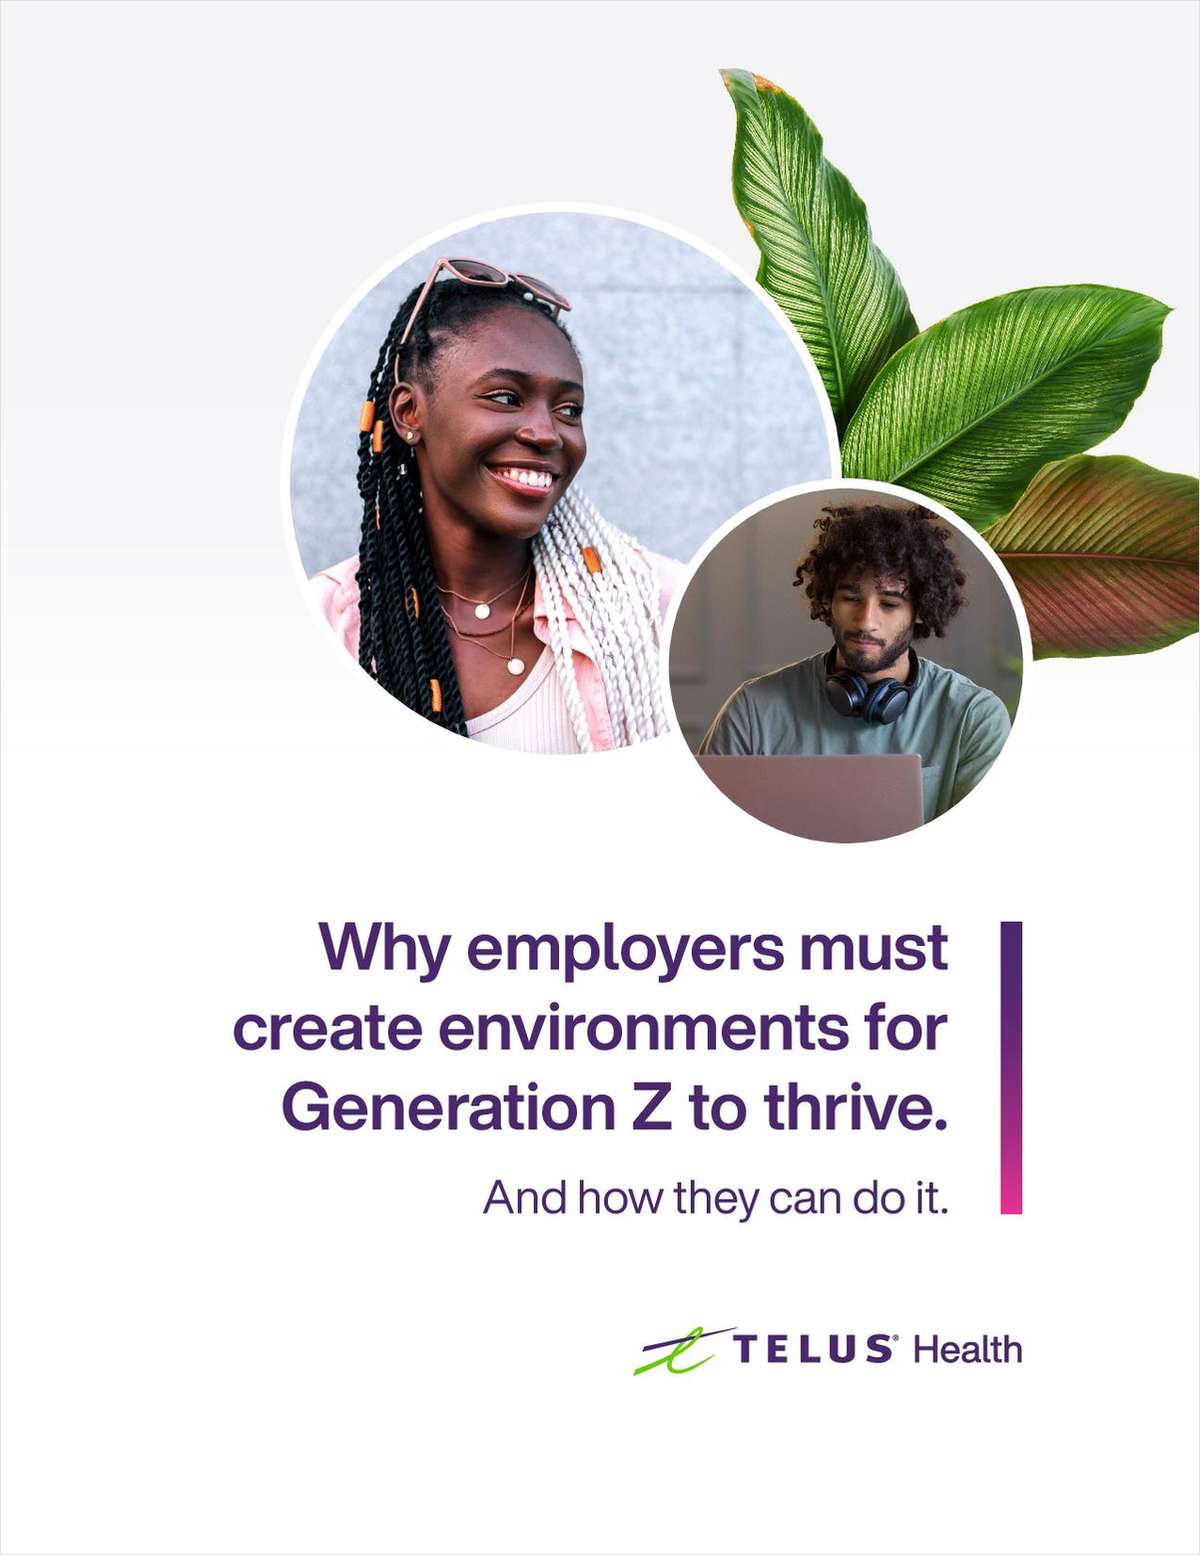 Why employers must create environments for Generation Z to thrive